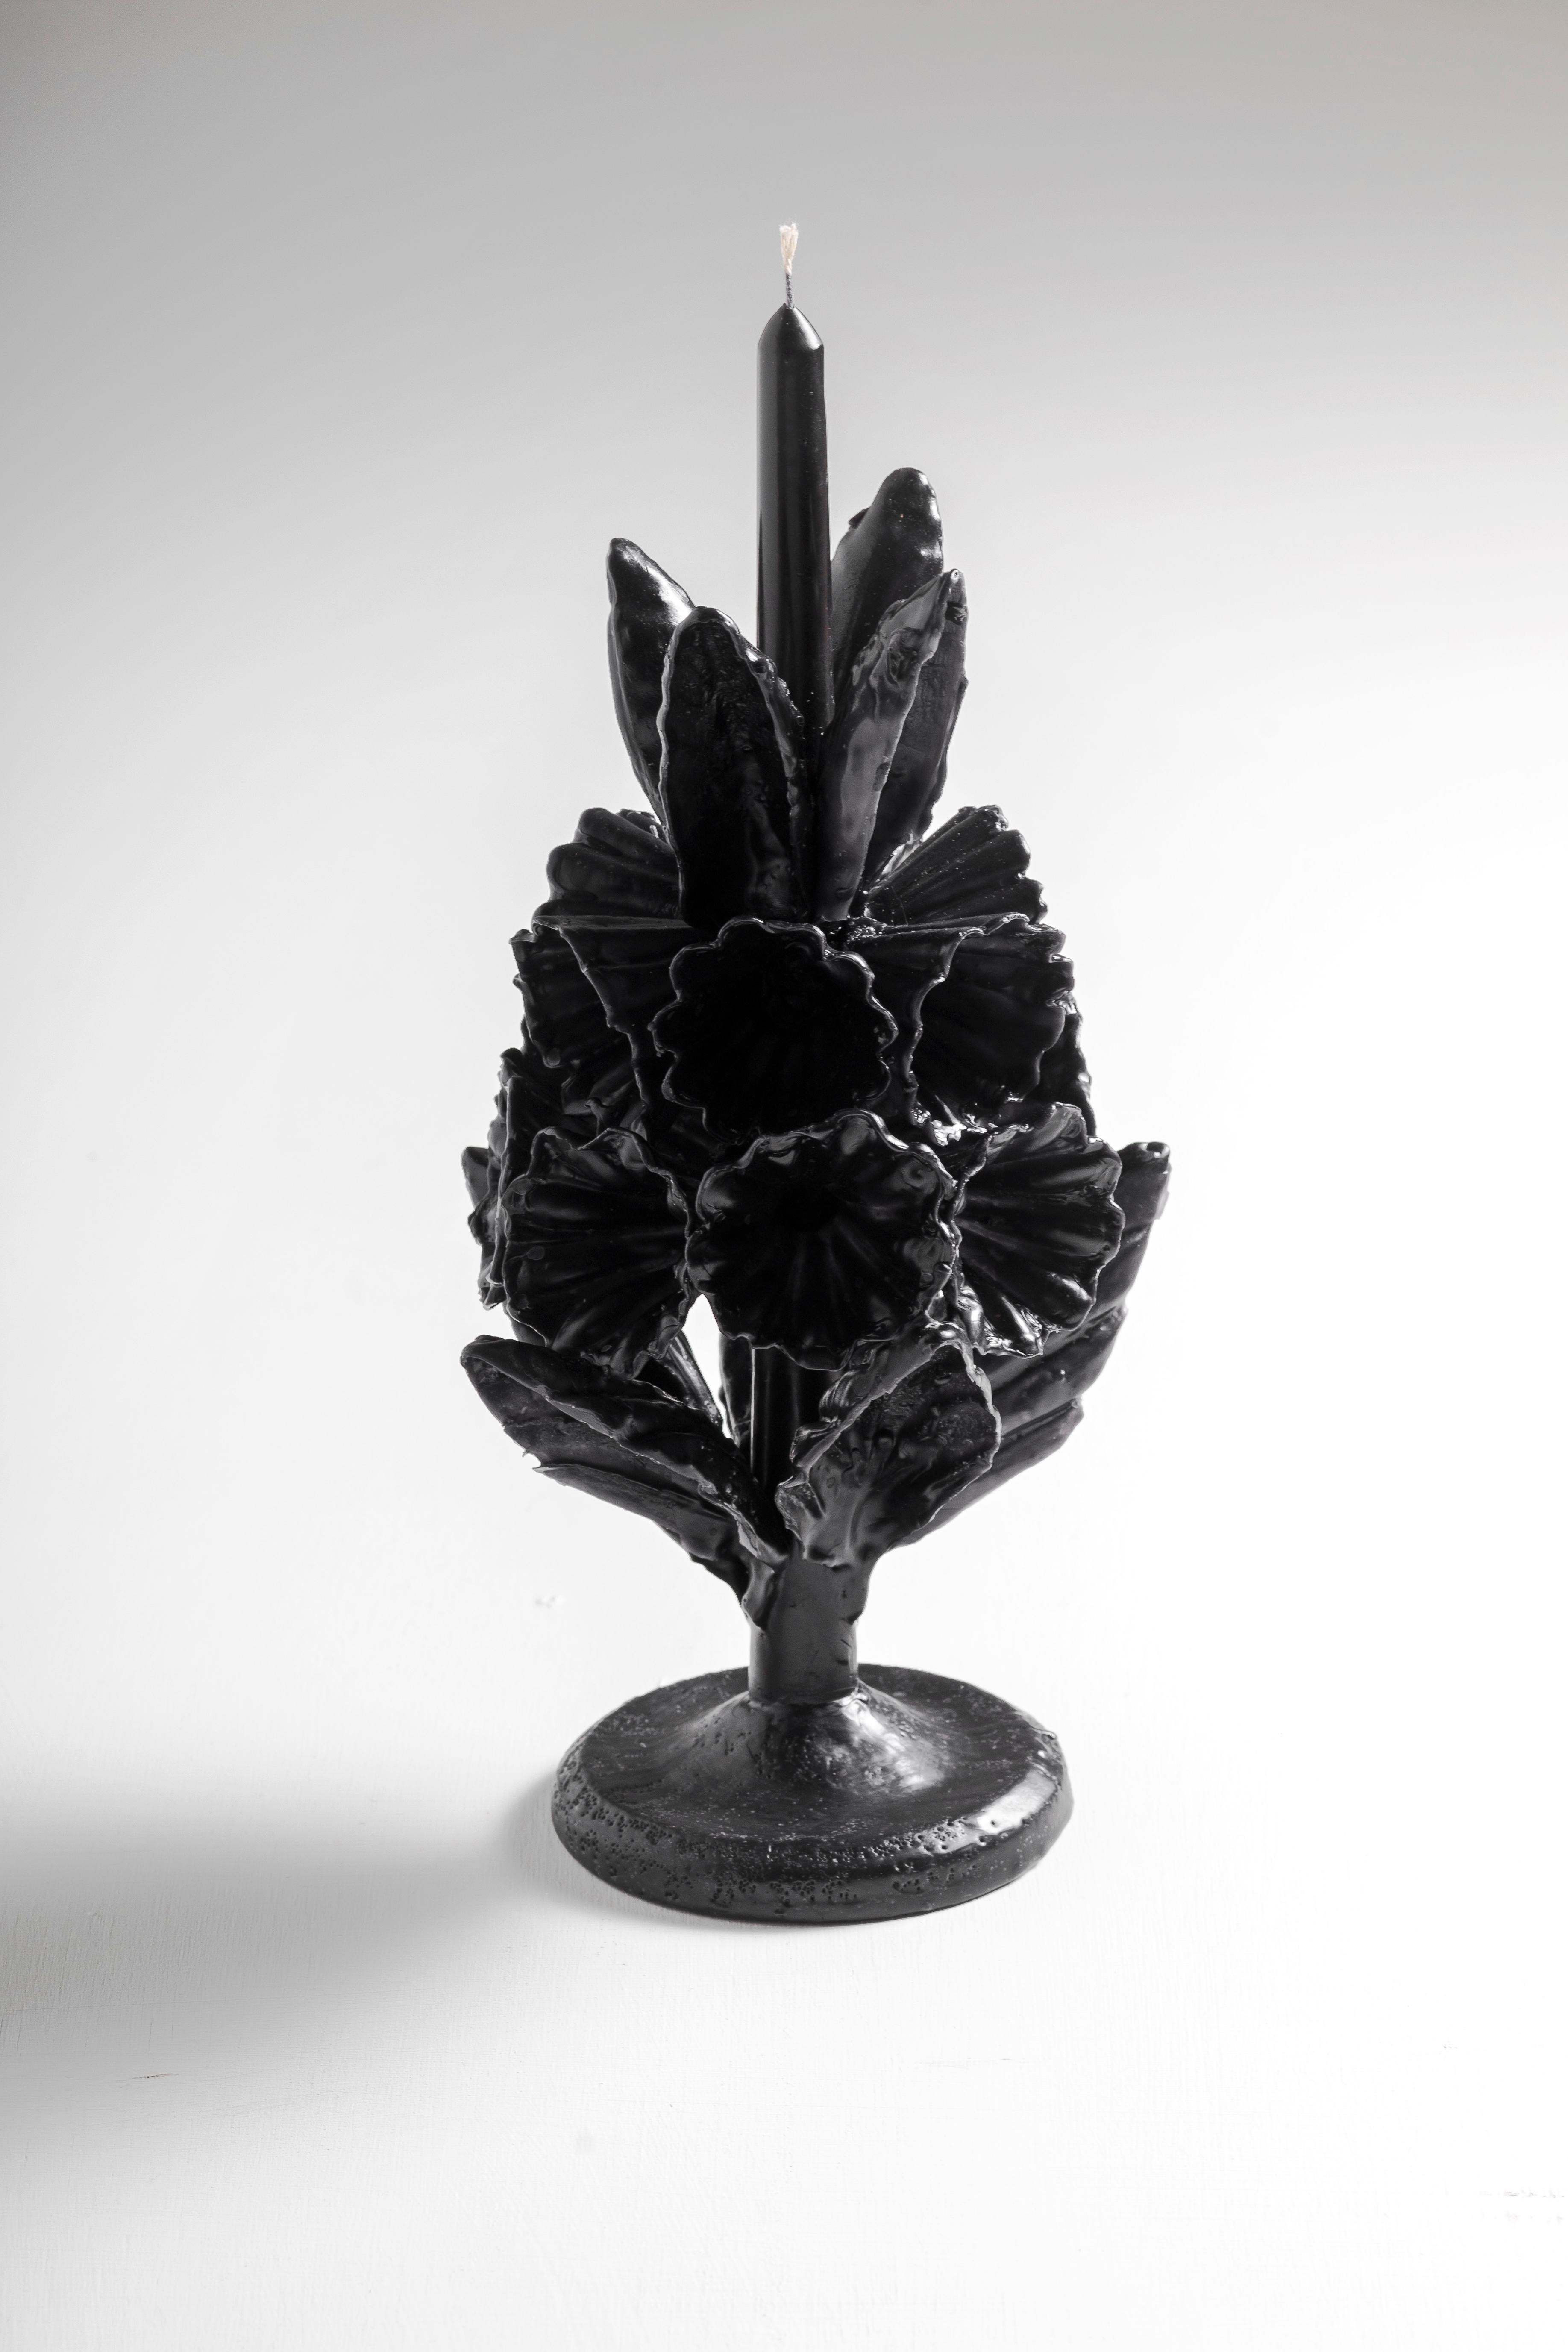 Handcrafted decorative traditional candle.

Crafted with precision, these candle holders feature slipcasted ceramic adorned with a matte black glaze, providing both durability and the tactile charm of traditional “barro negro” pottery. Influenced by